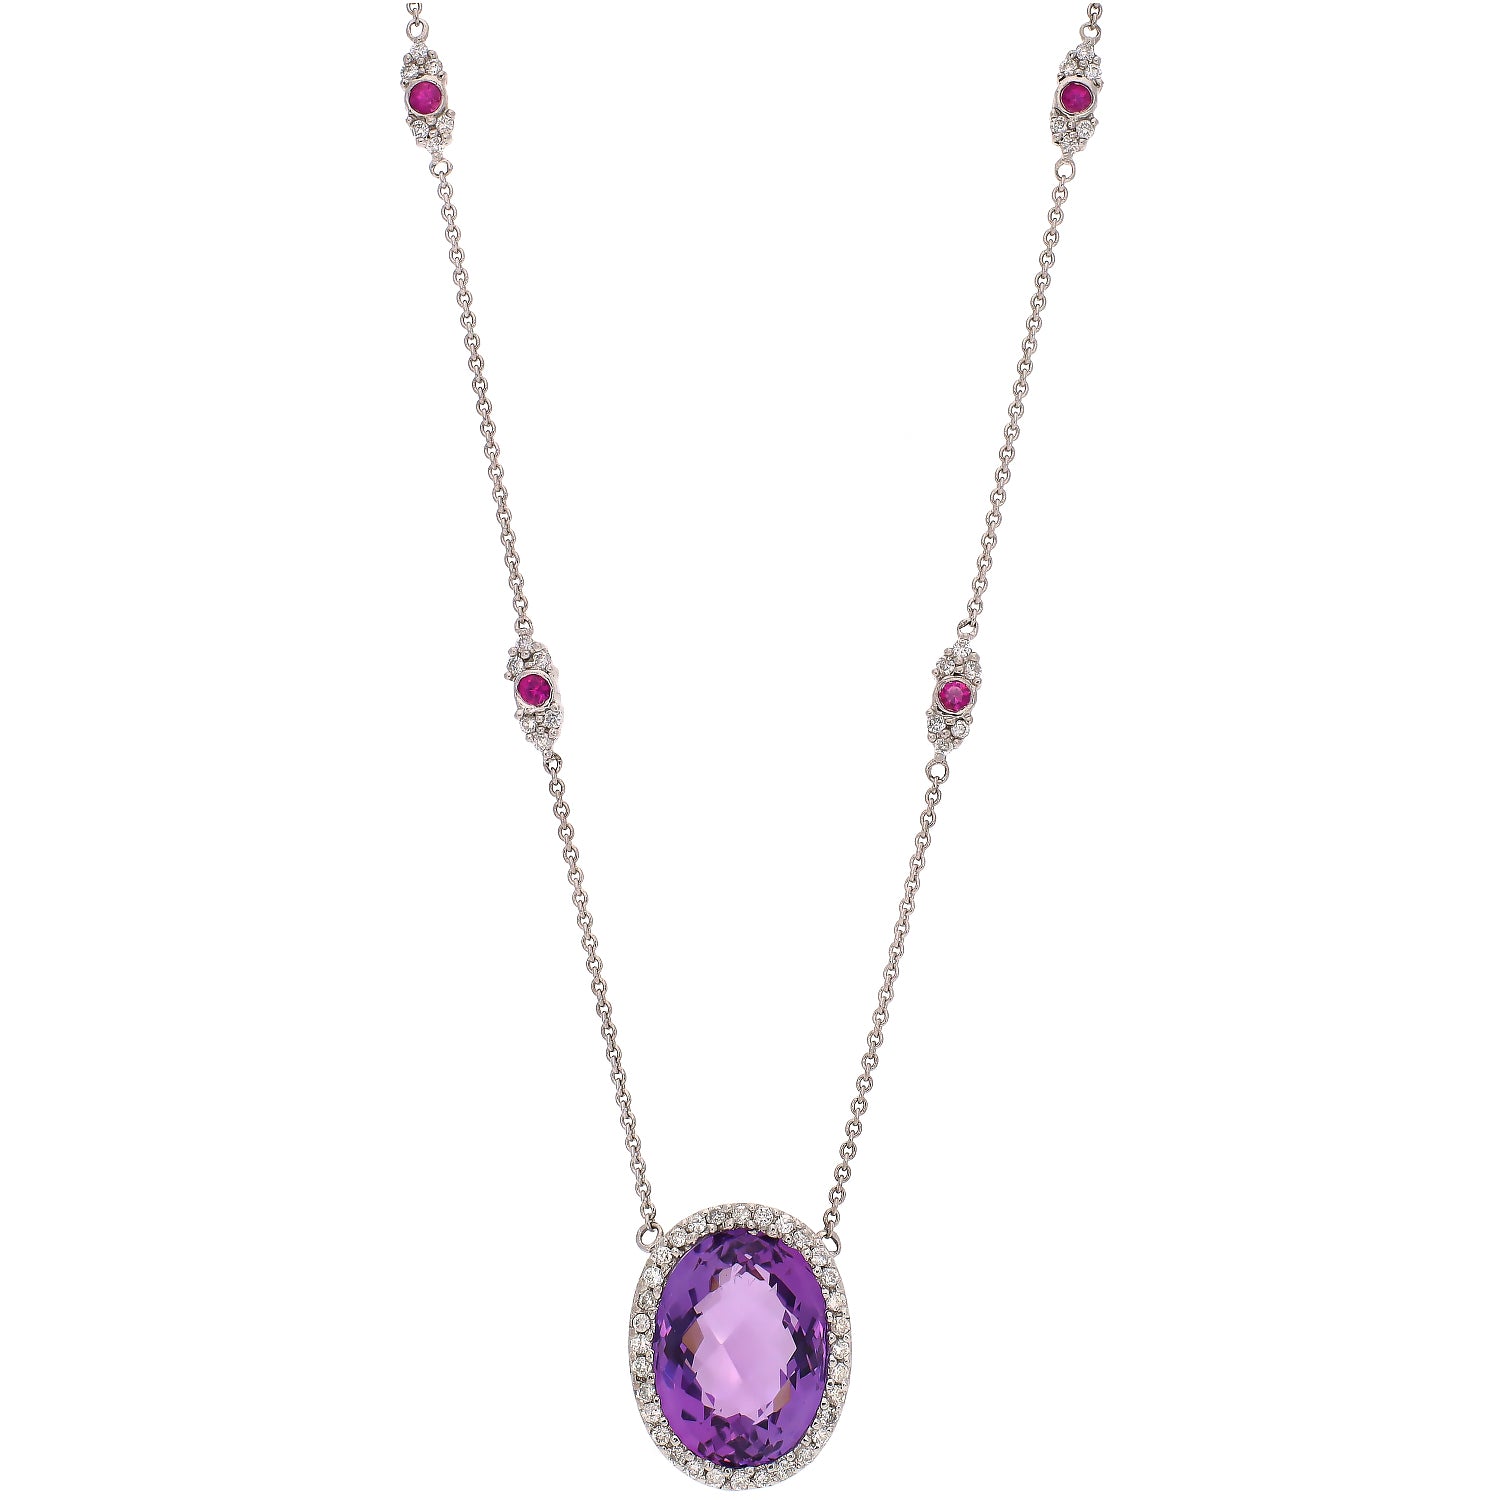 14K White Gold Amethyst, Ruby, and Diamond Necklace